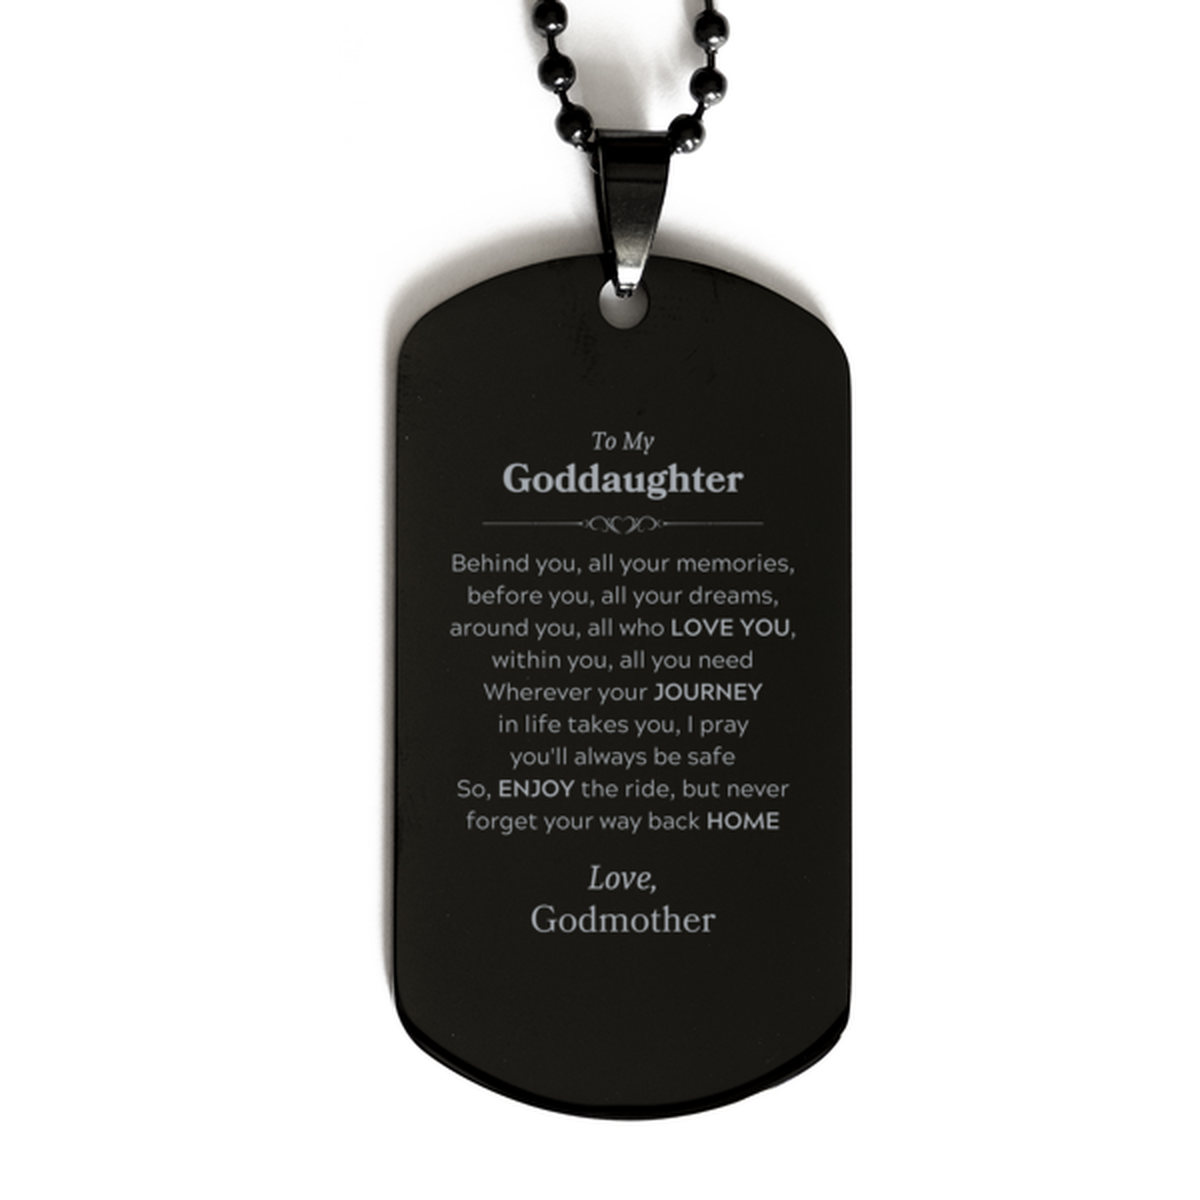 To My Goddaughter Graduation Gifts from Godmother, Goddaughter Black Dog Tag Christmas Birthday Gifts for Goddaughter Behind you, all your memories, before you, all your dreams. Love, Godmother